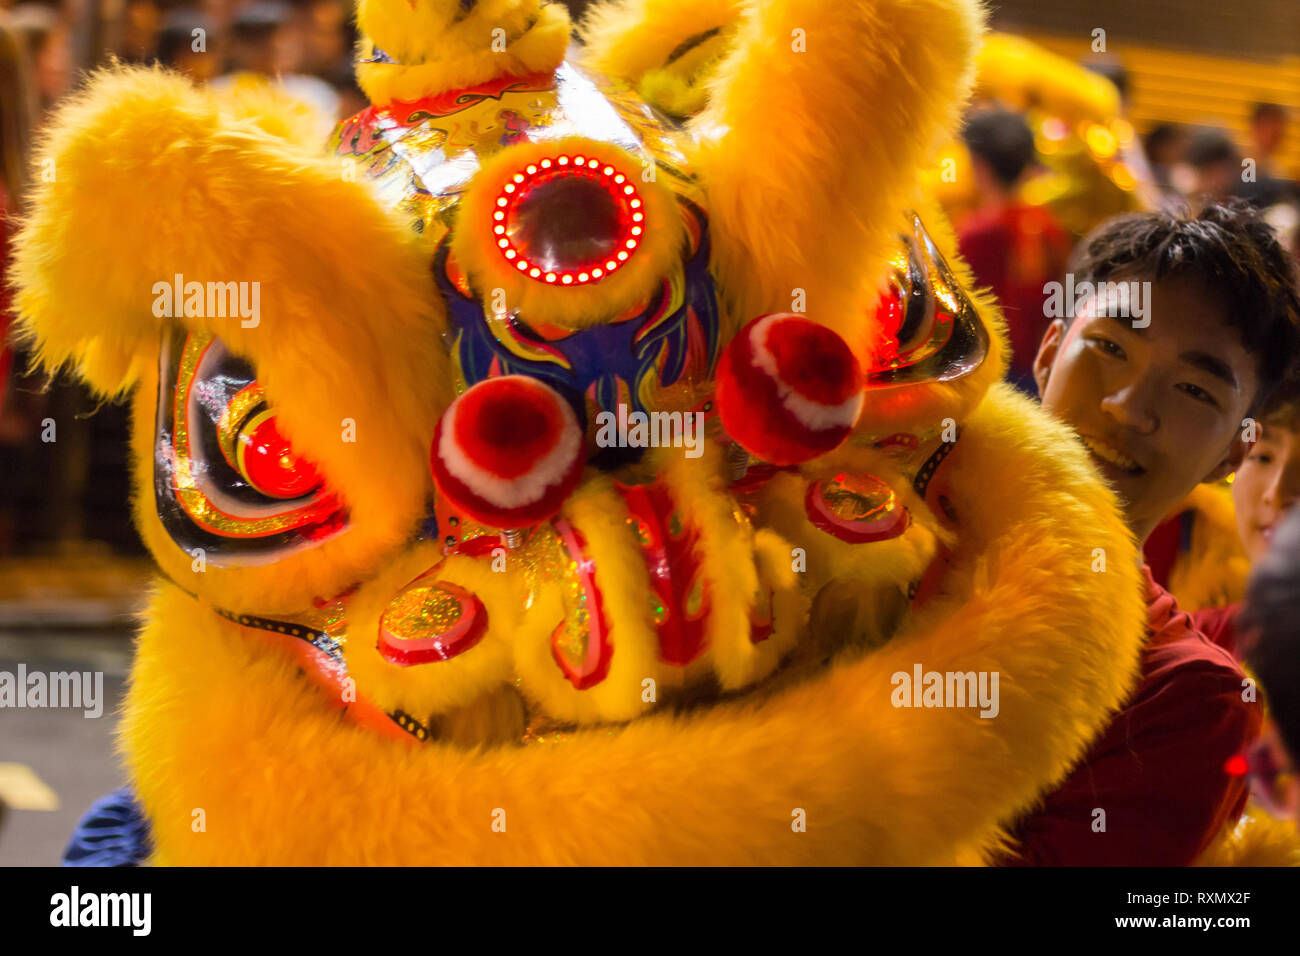 Man with Chinese dragon mask celebrating Chinese New Year (Lunar new year) celebrations in Kowloon, Hong Kong (Year of the Pig) Stock Photo